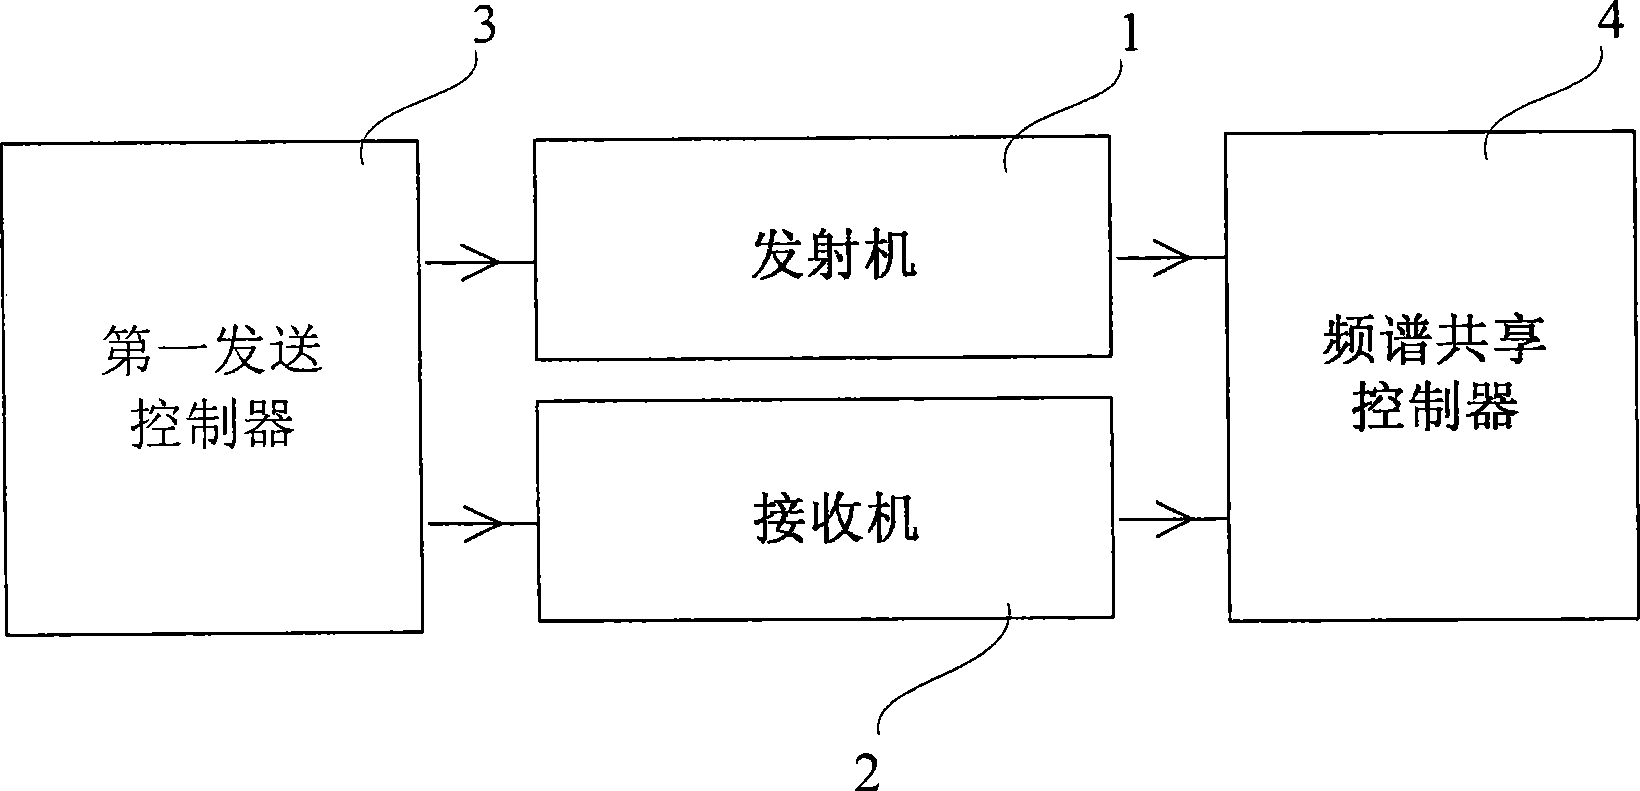 Method and system for sharing distributed frequency spectrum